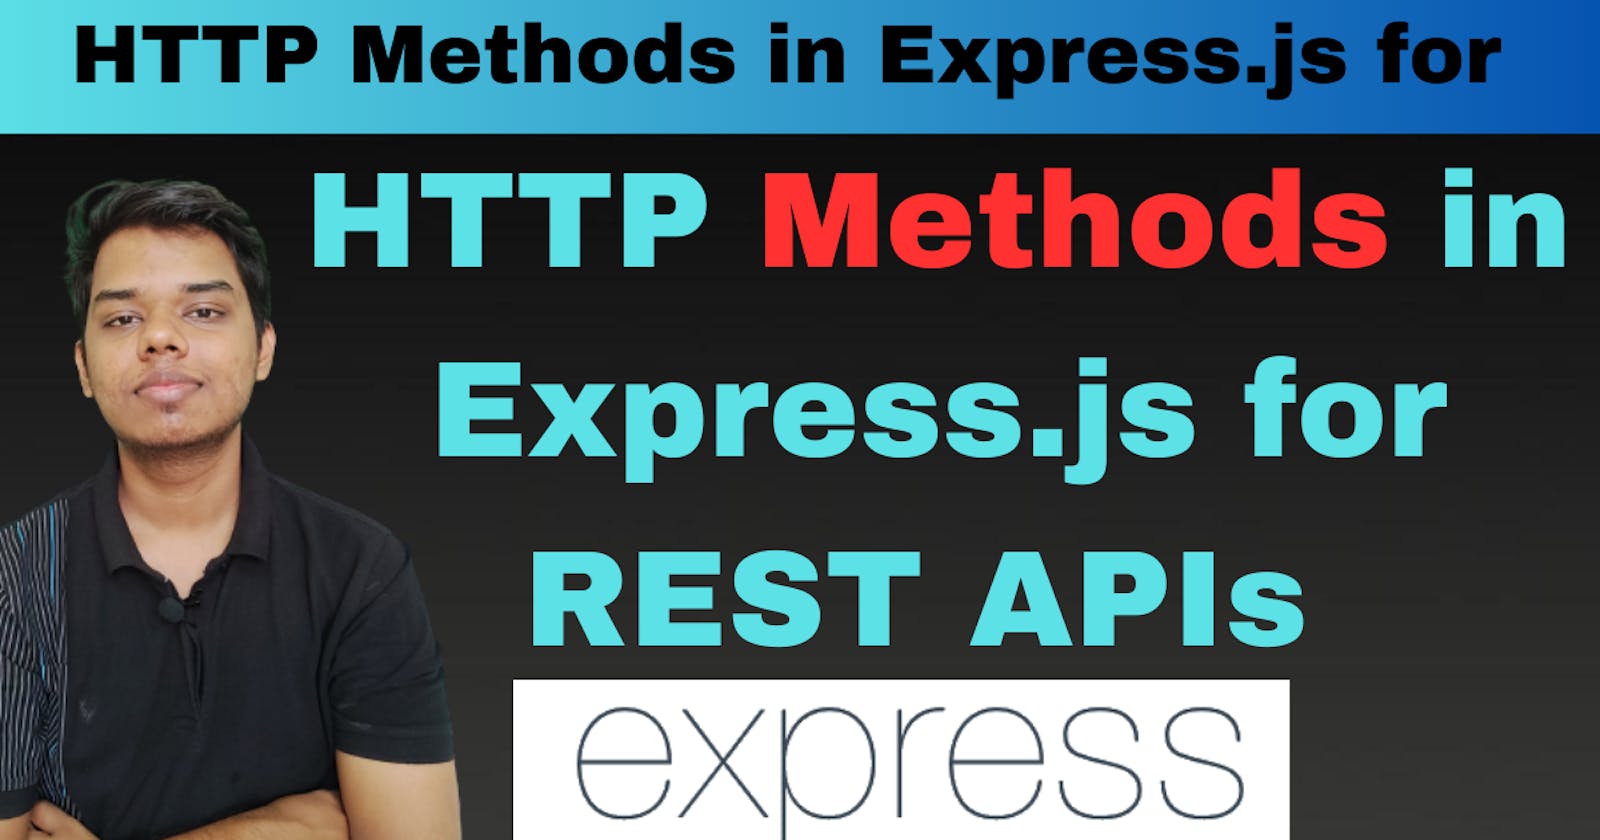 How to Use HTTP Methods in Express.js for REST APIs